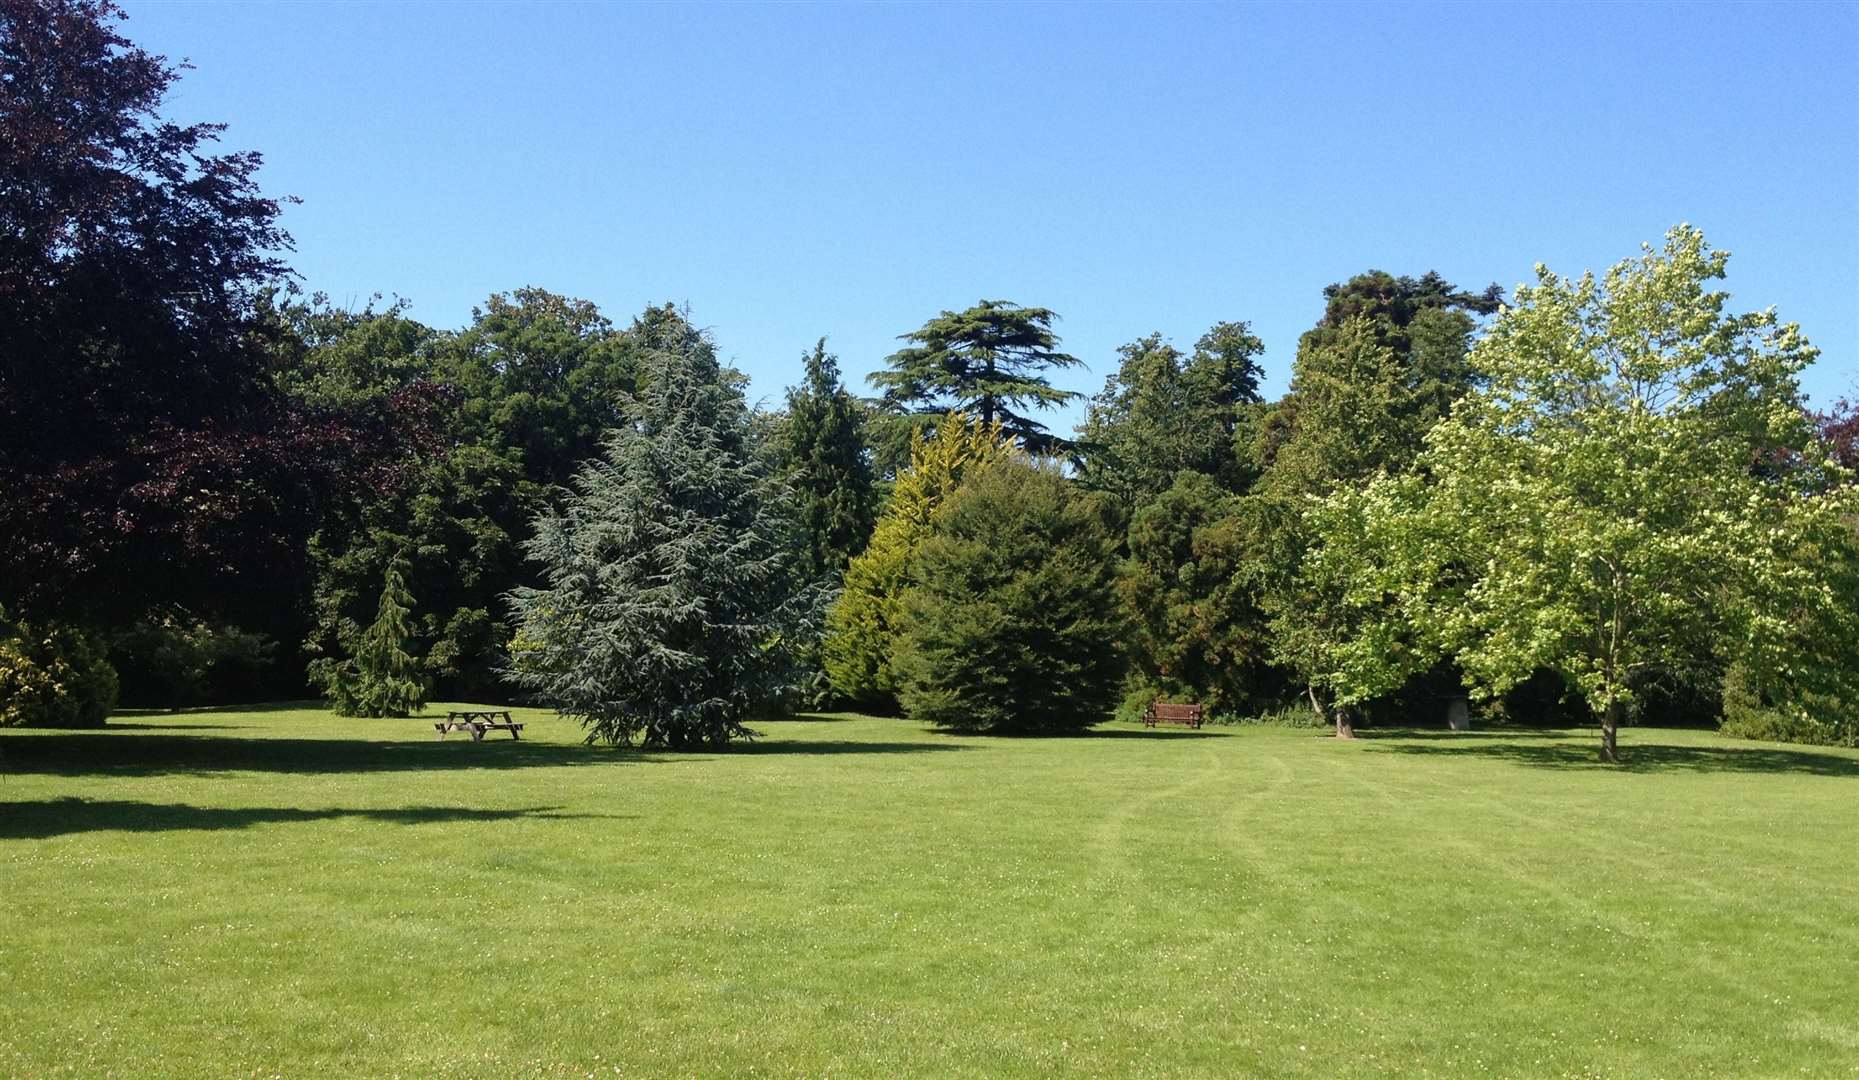 Enjoy a relaxing picnic in Quex Park. Picture: Keith Dunmall